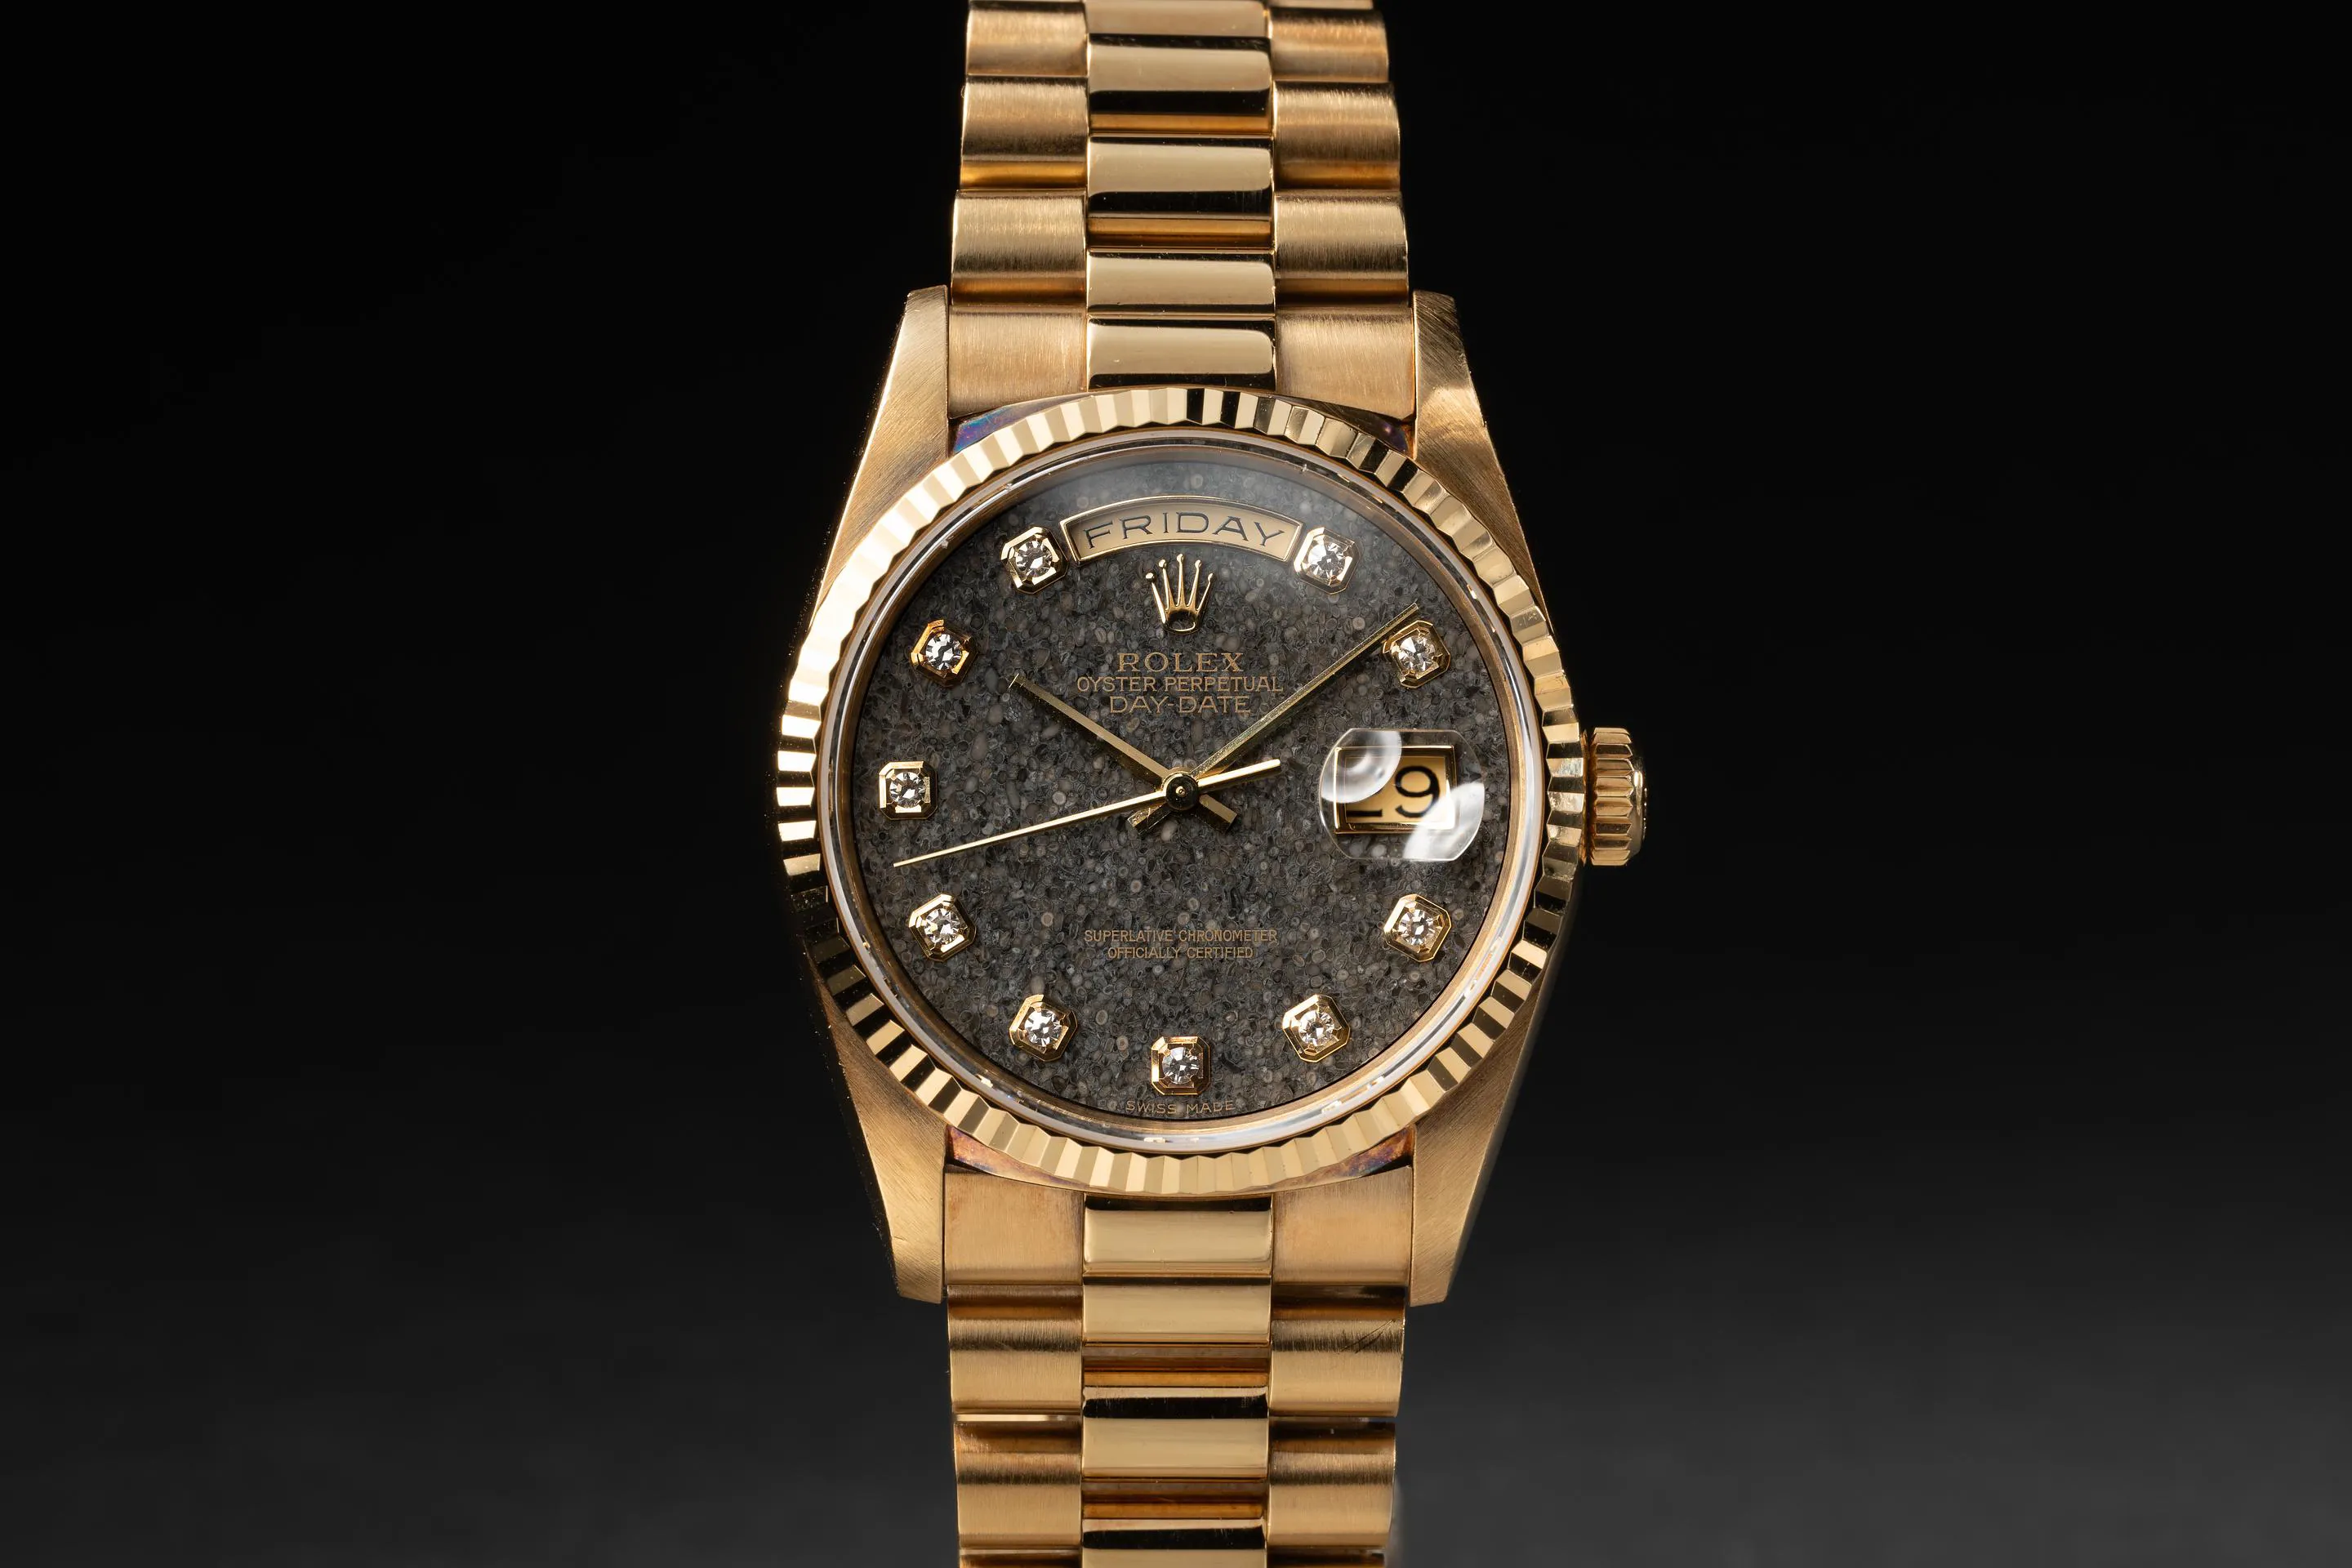 Rolex Day-Date 18238 Yellow gold